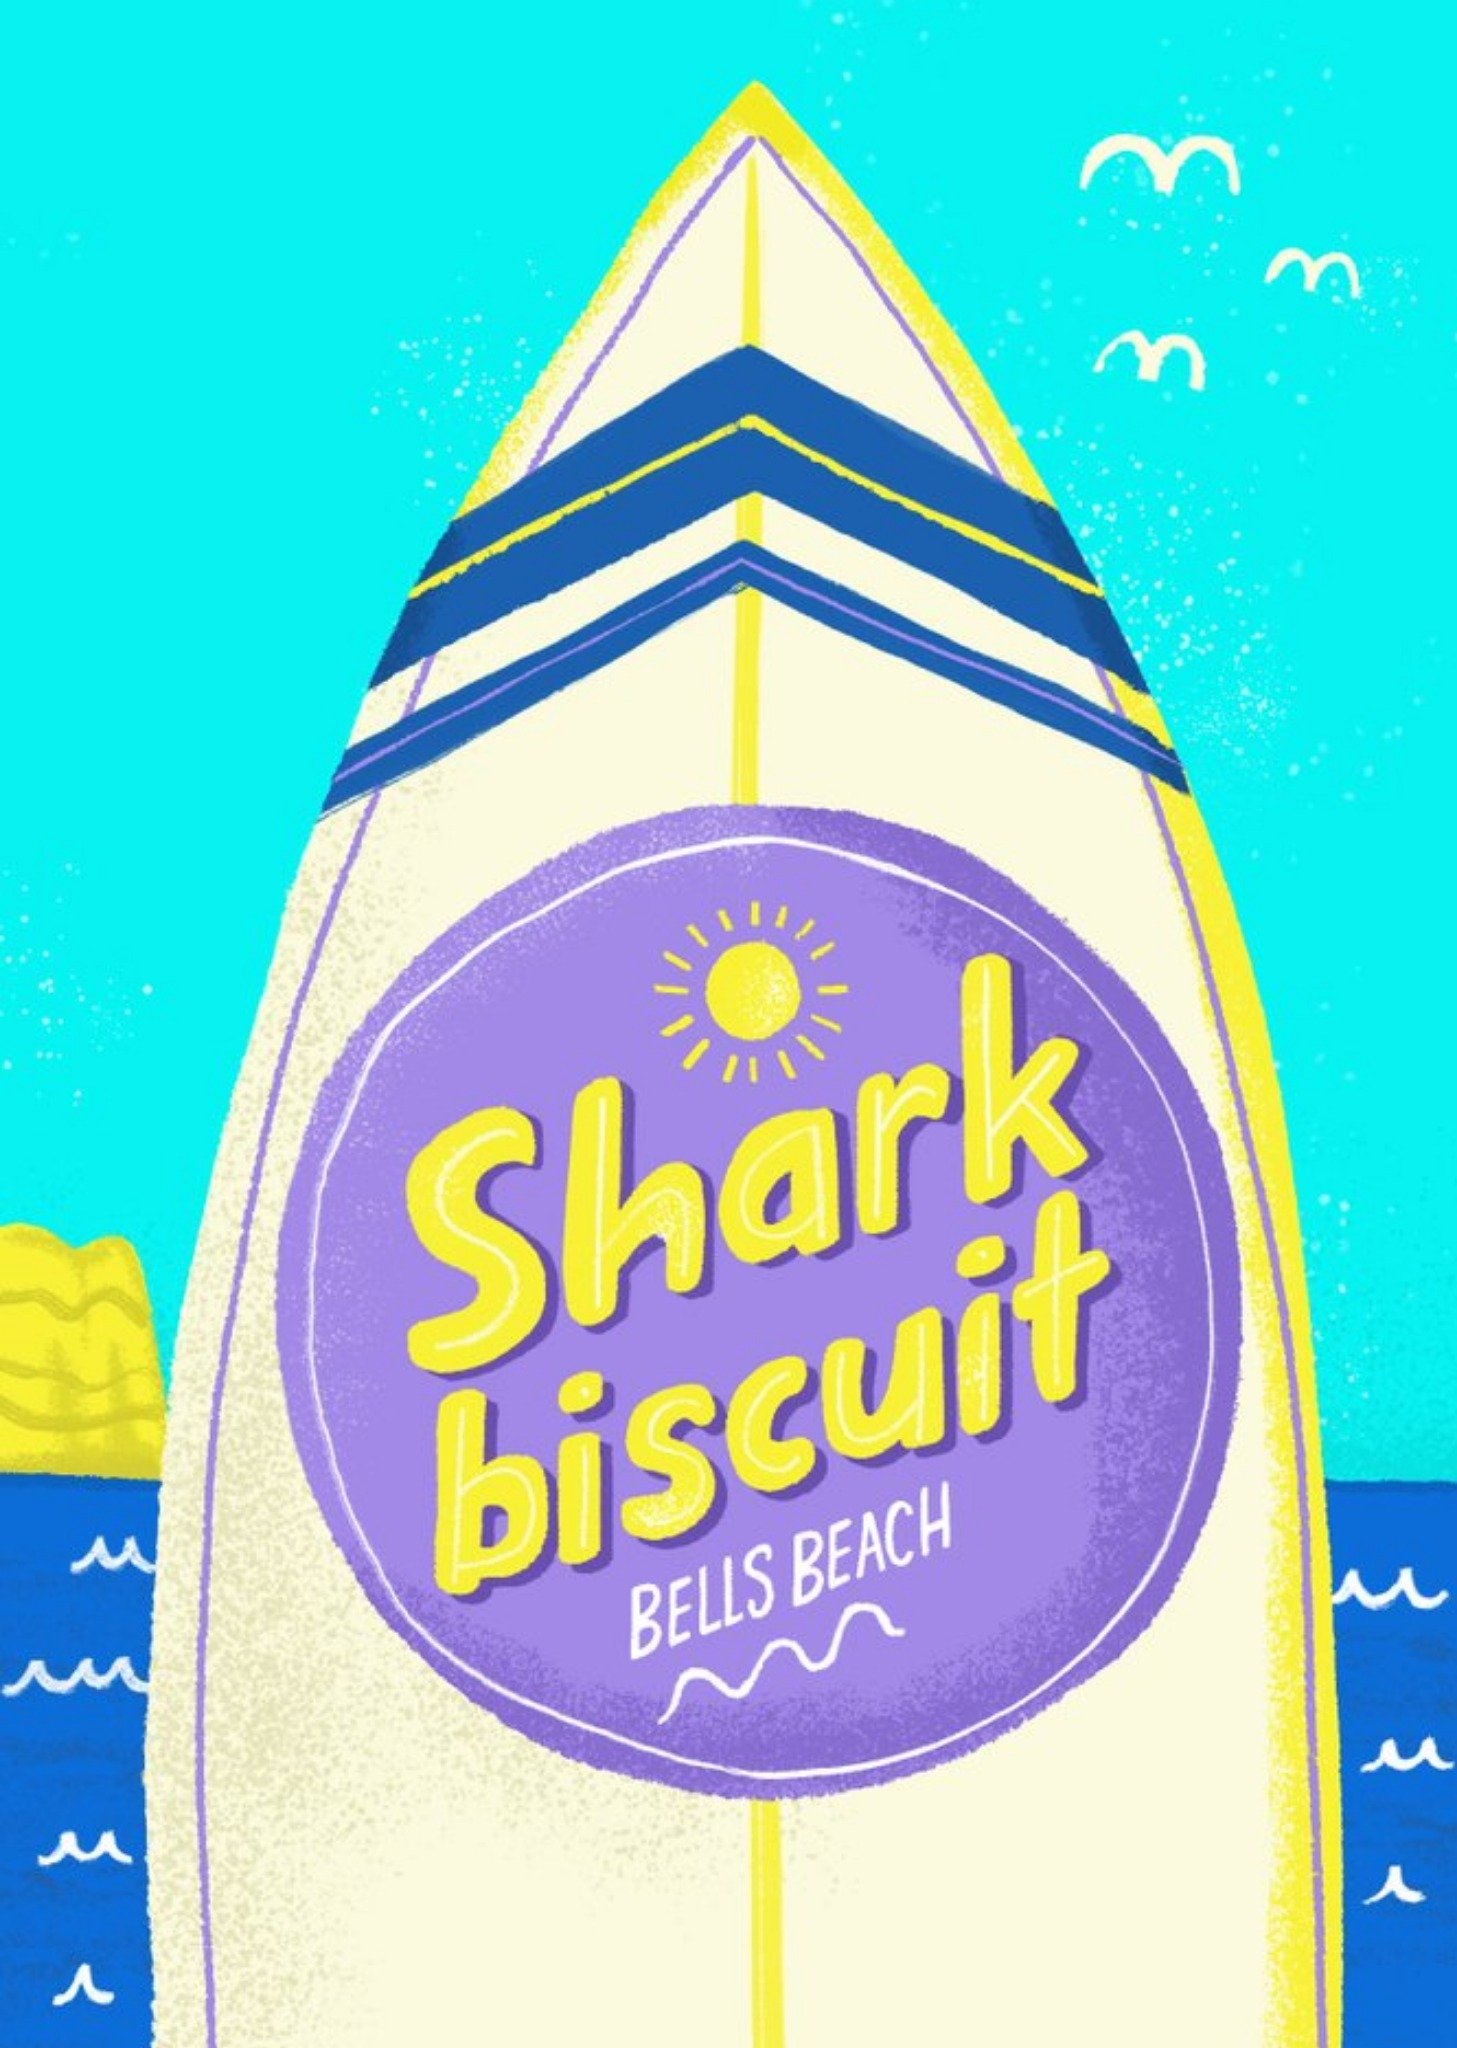 Moonpig Vibrant Illustration Of A Surf Board With A Logo Shark Biscuit Card, Large